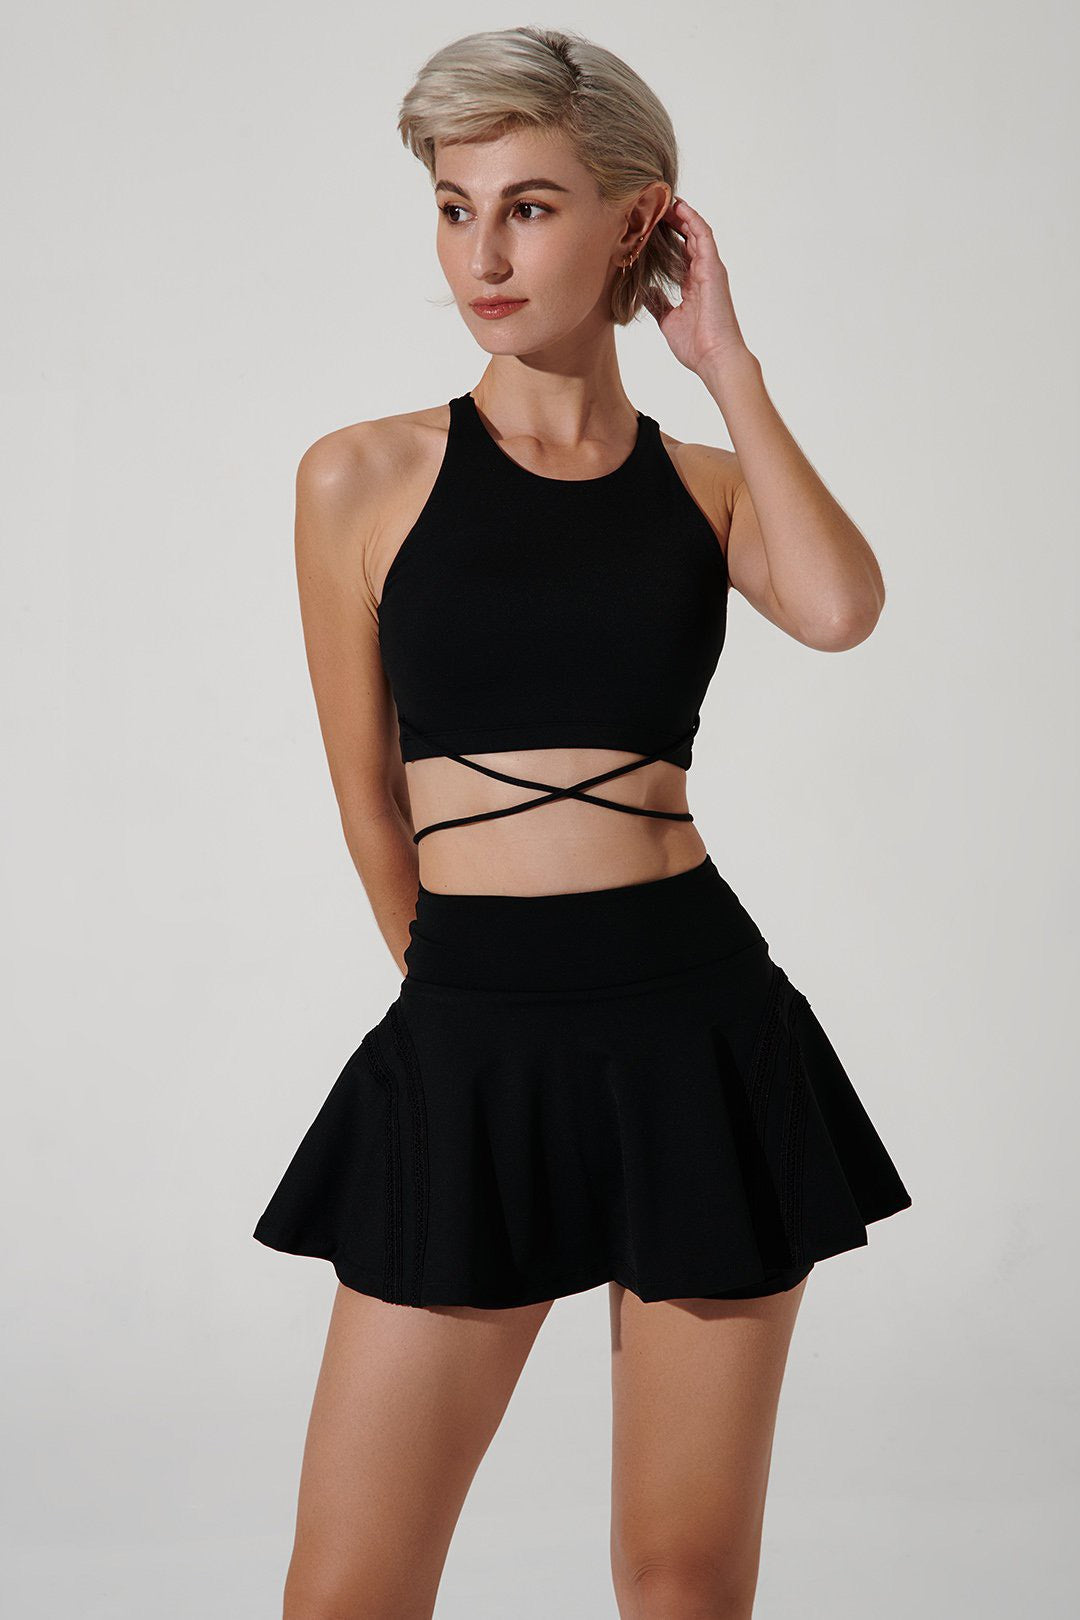 Black women's skirt by Elinor, style OW-0139-WSK-BK, in a classic and elegant design.